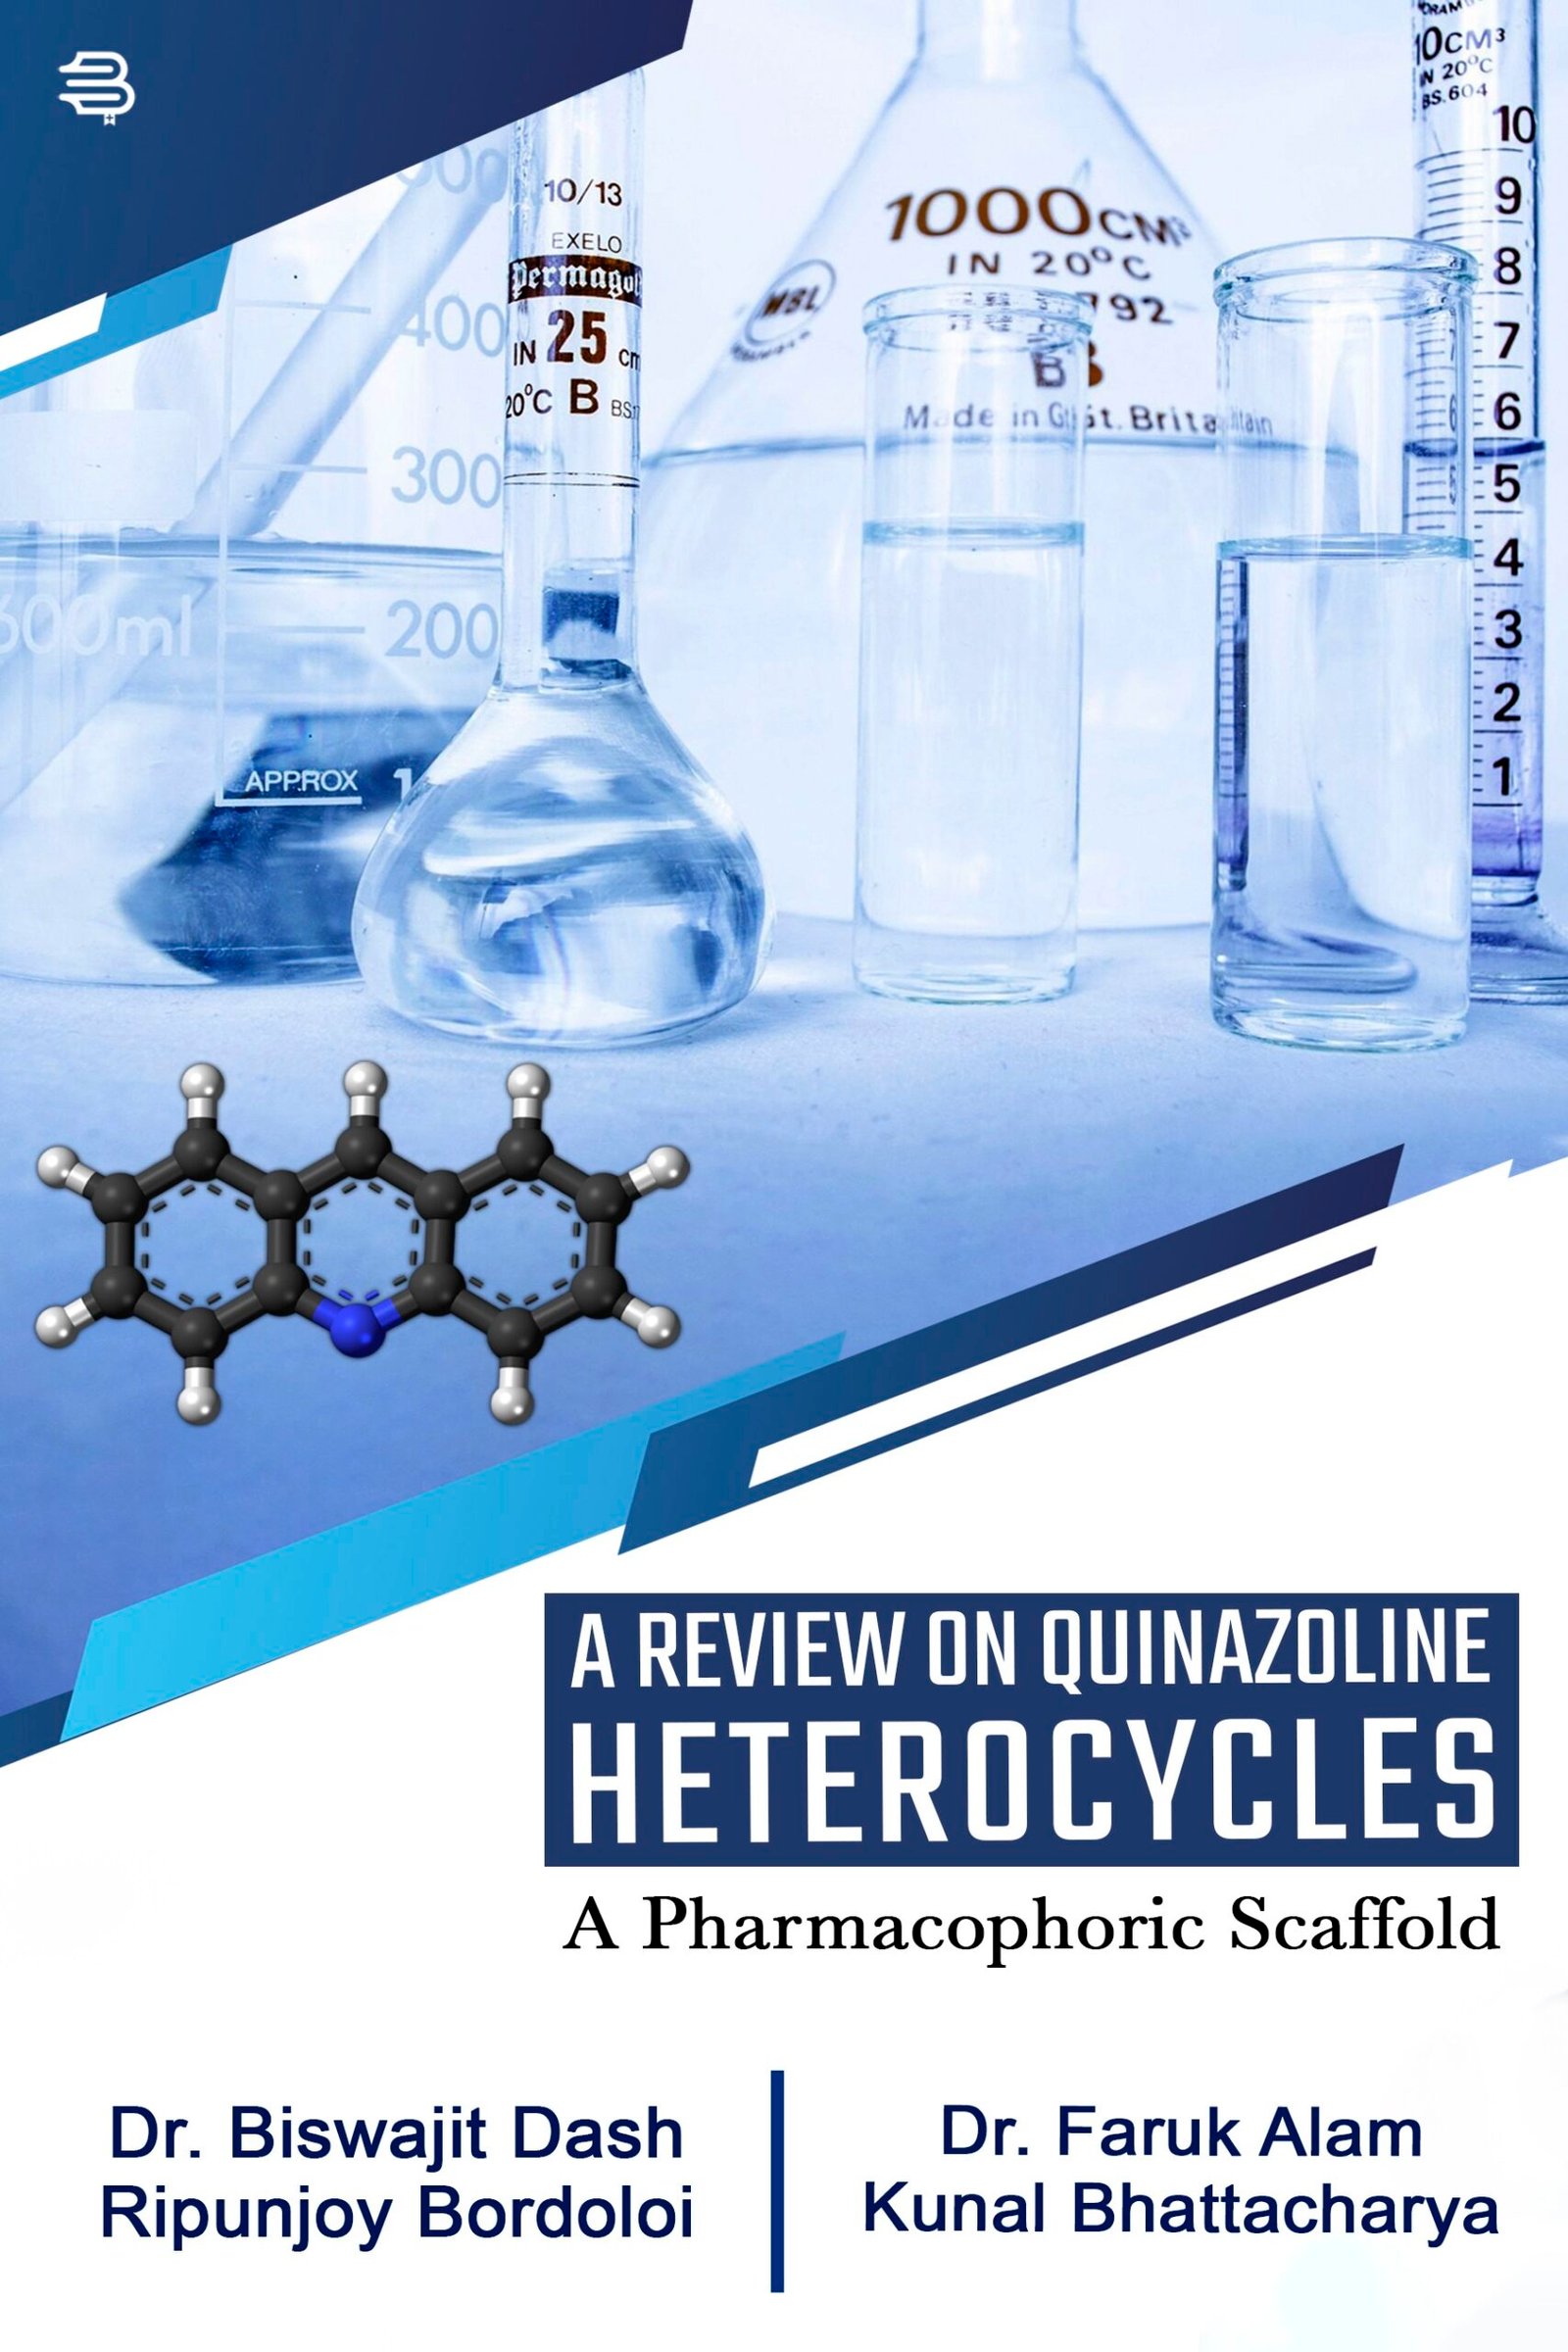 A REVIEW ON QUINAZOLINE HETEROCYCLES A Pharmacophoric Scaffold BY (Dr. Biswajit Dash)